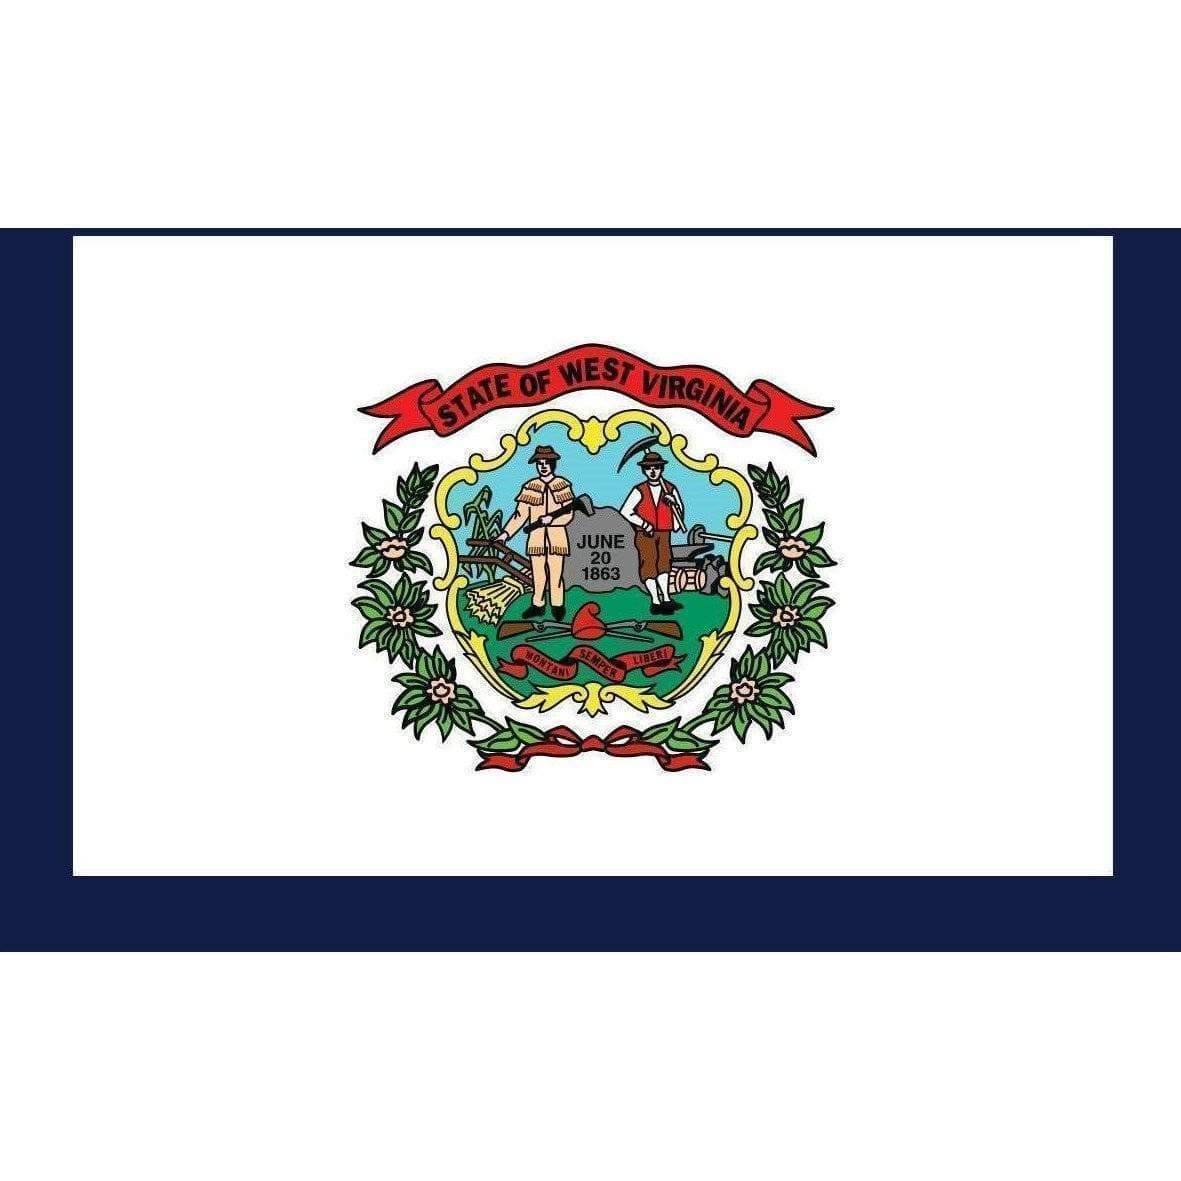 West Virginia Flag 3 x 5 ft. Nylon Dyed Flag (USA Made) with Additional Reinforced Stitching.